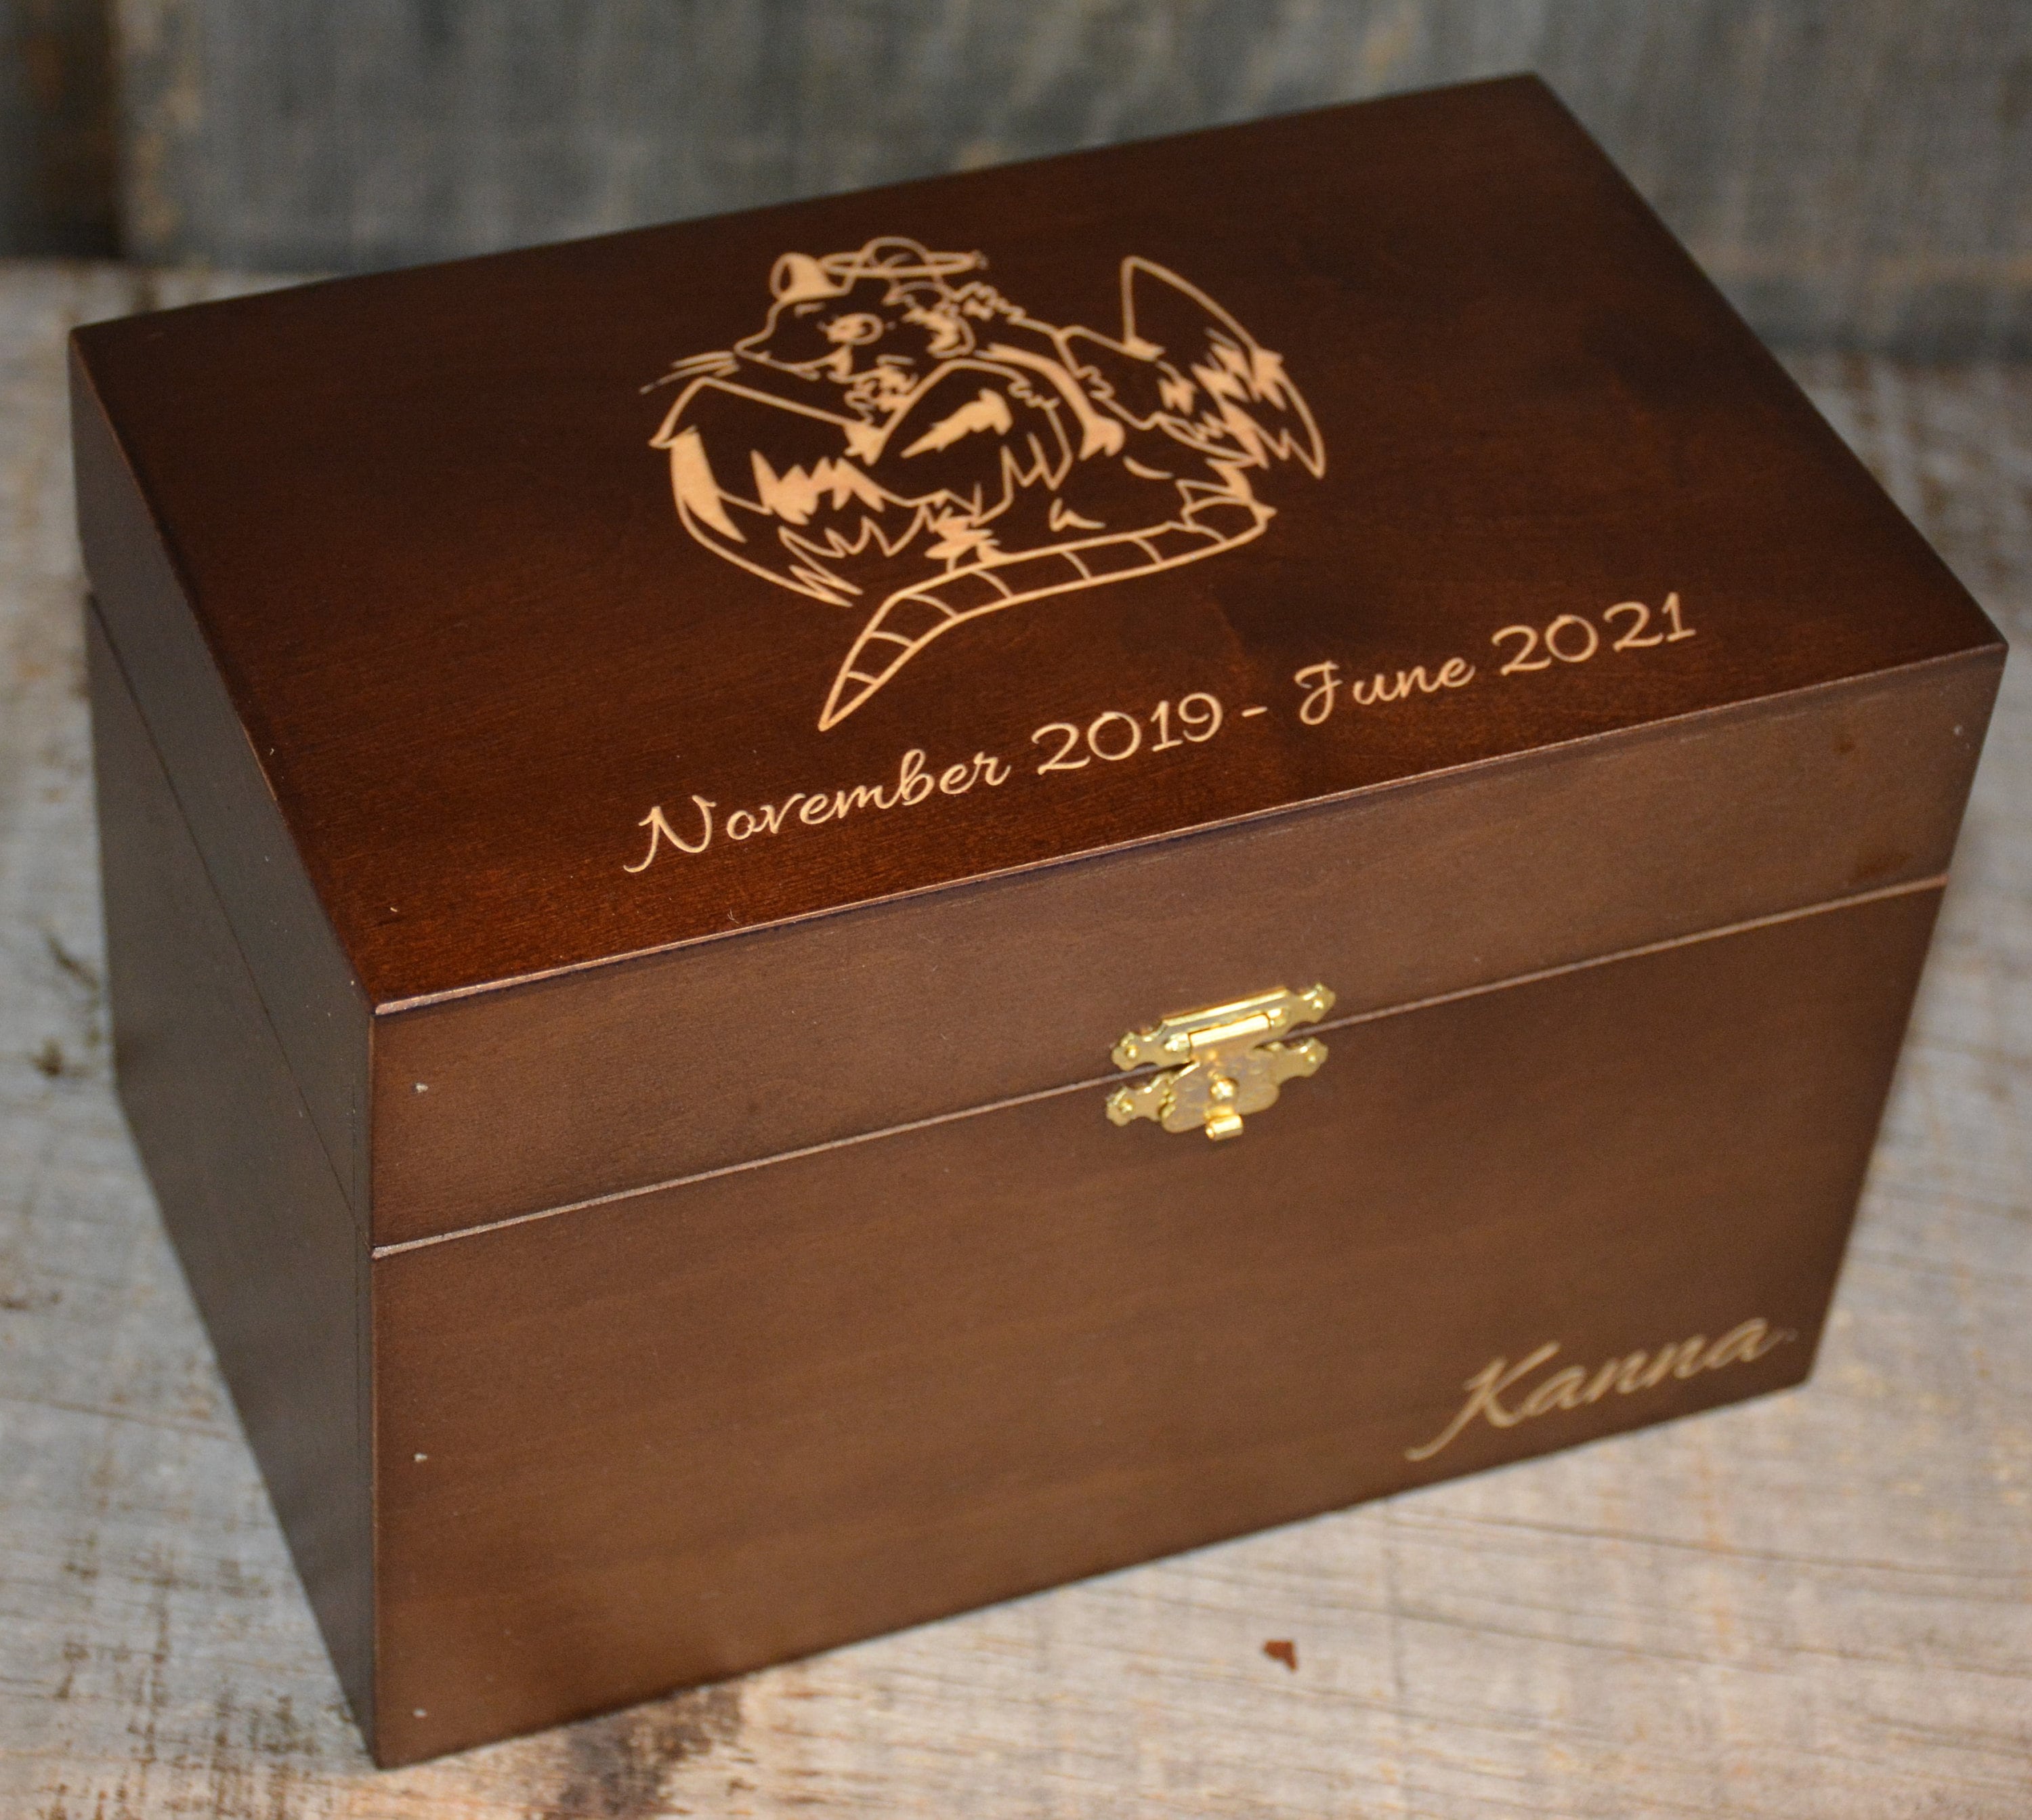 Engraved Large Square Wooden Boxes Small Personalised Wood Keepsake Gift Box 